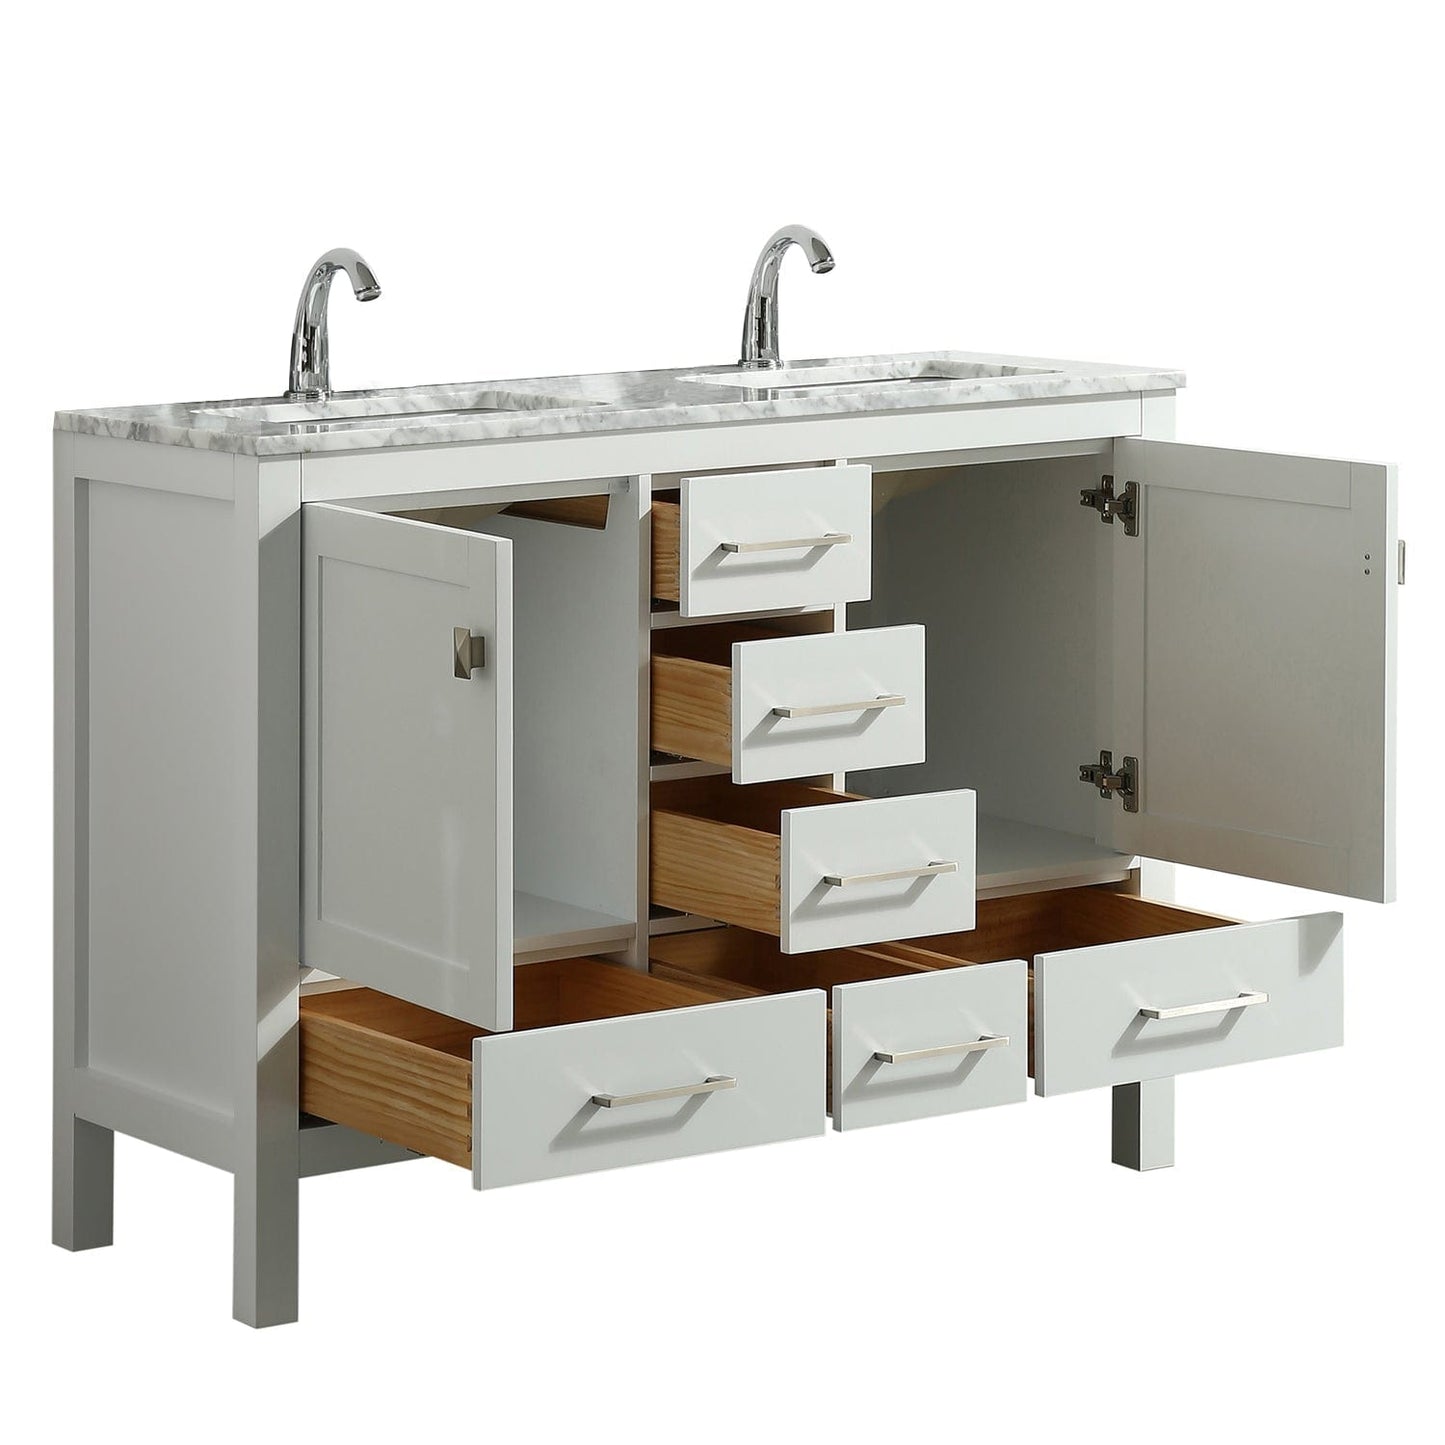 Eviva London 48" x 18" White Transitional Double Sink Bathroom Vanity with White Carrara Top